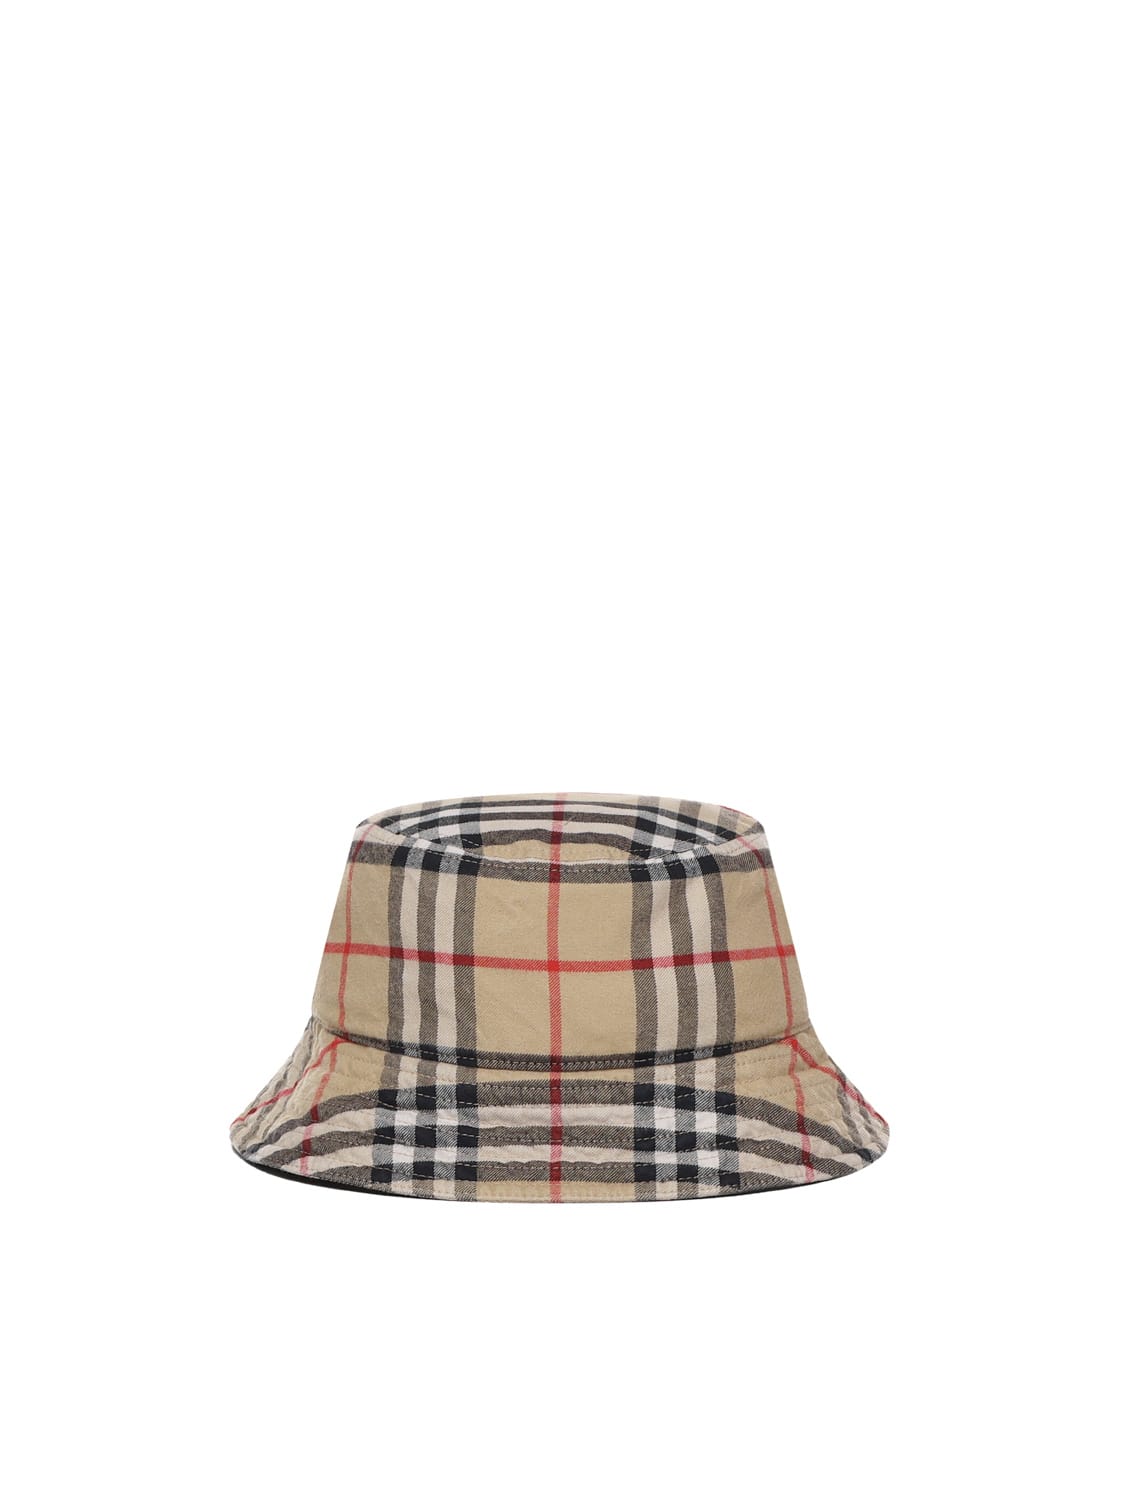 Burberry Vintage Check Bucket Hat In Cotton In Archive Beige